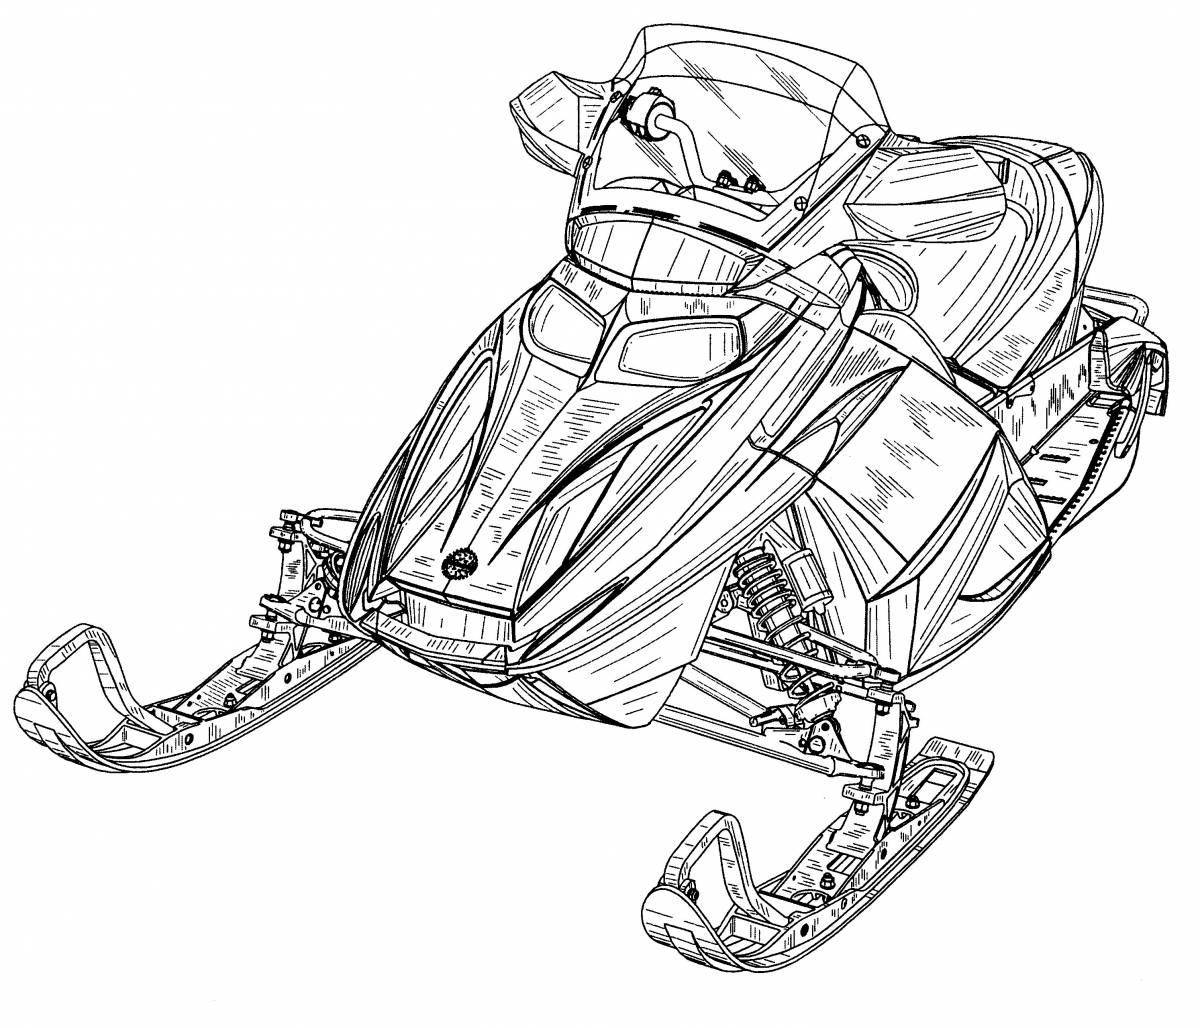 Animated snowmobile coloring pages for kids